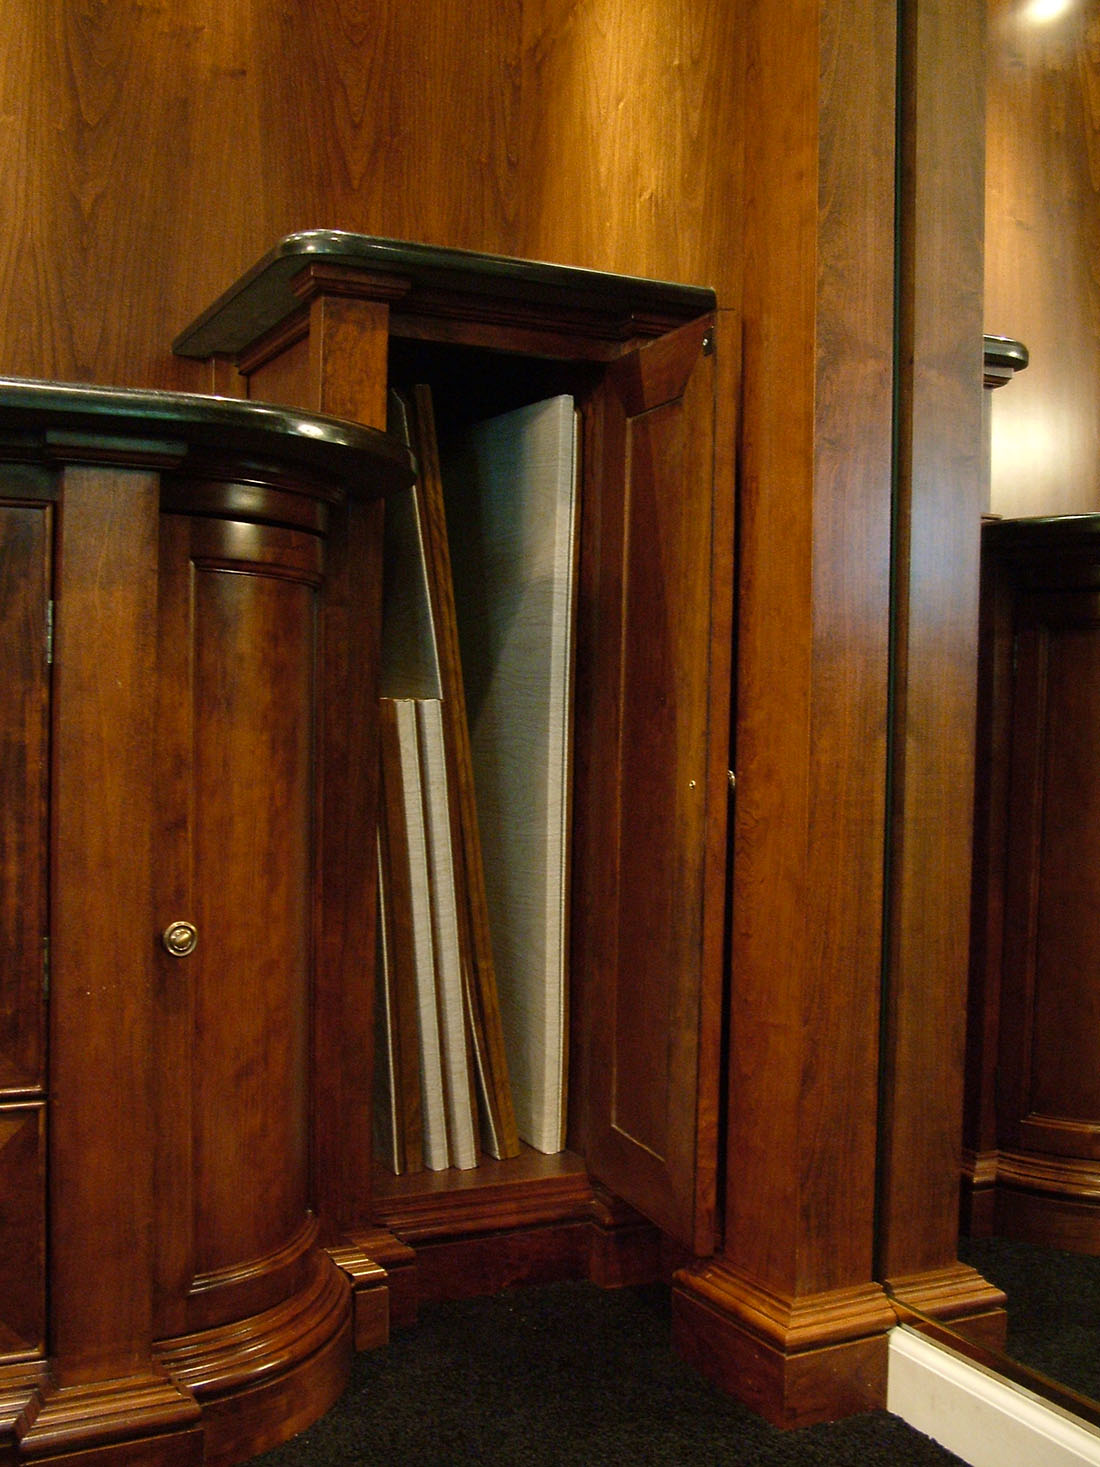 Door of tall cabinet section open to reveal tall table pads inside